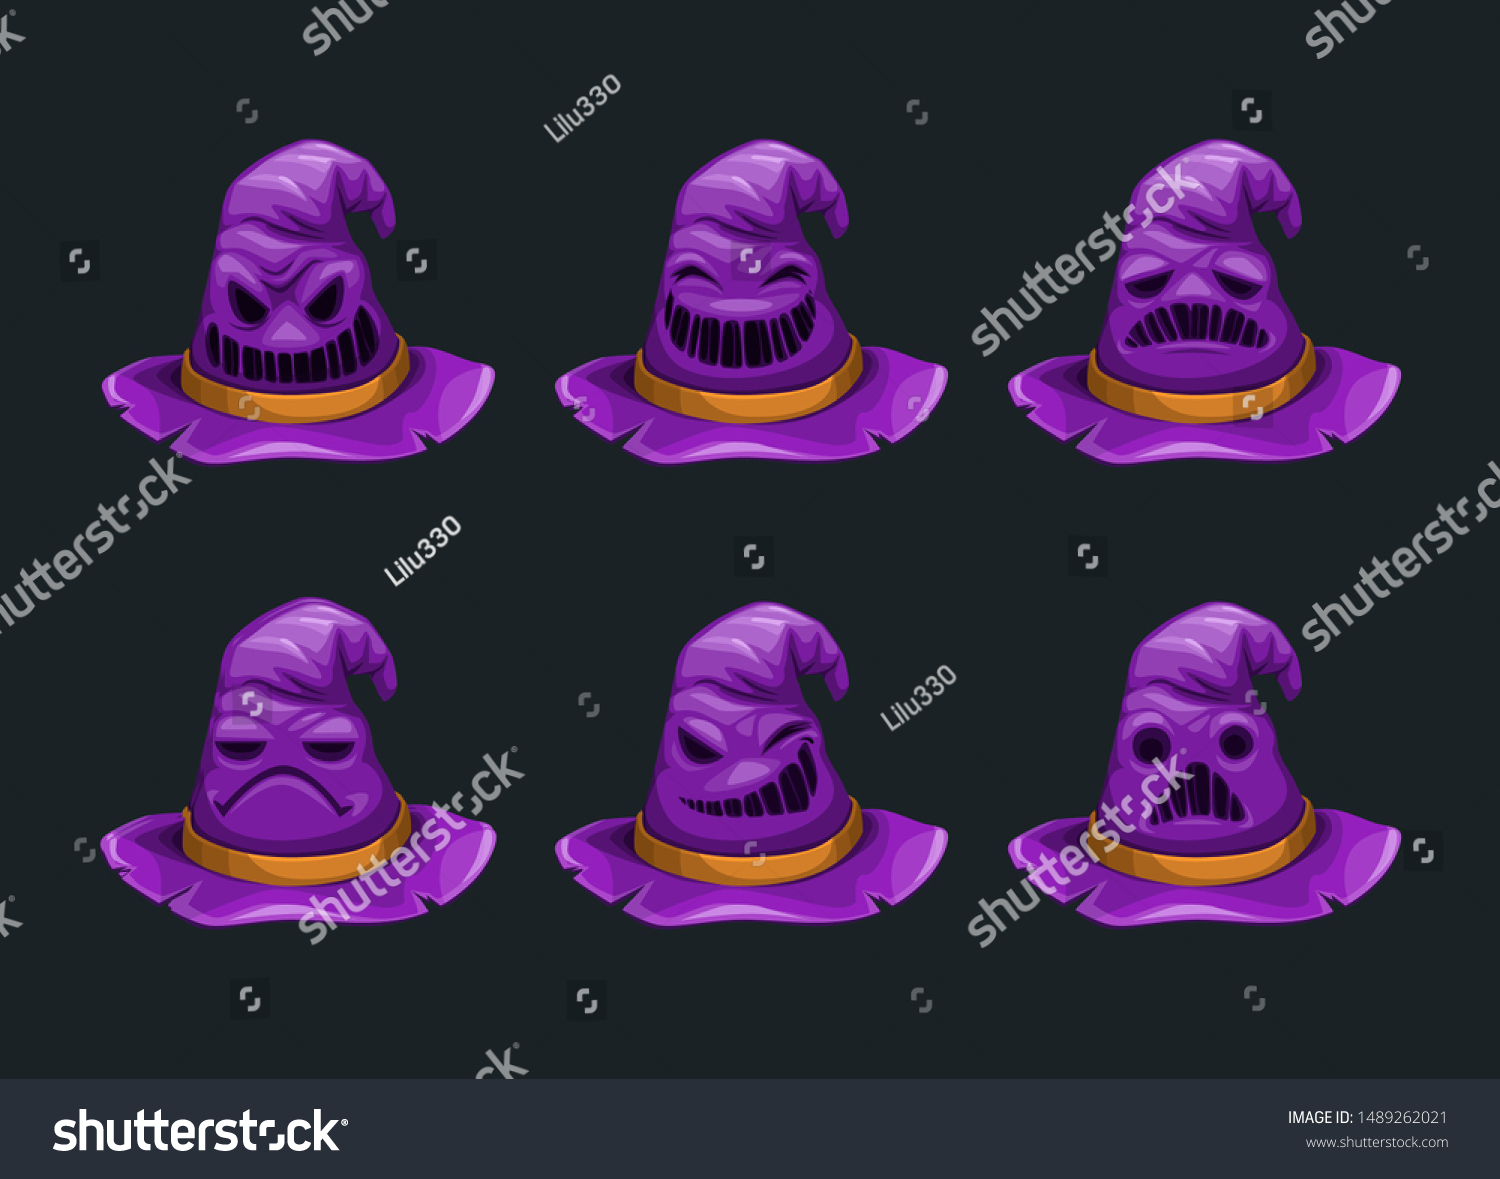 stock-vector-cartoon-fantasy-purple-hat-character-with-different-emotions-on-the-face-1489262021